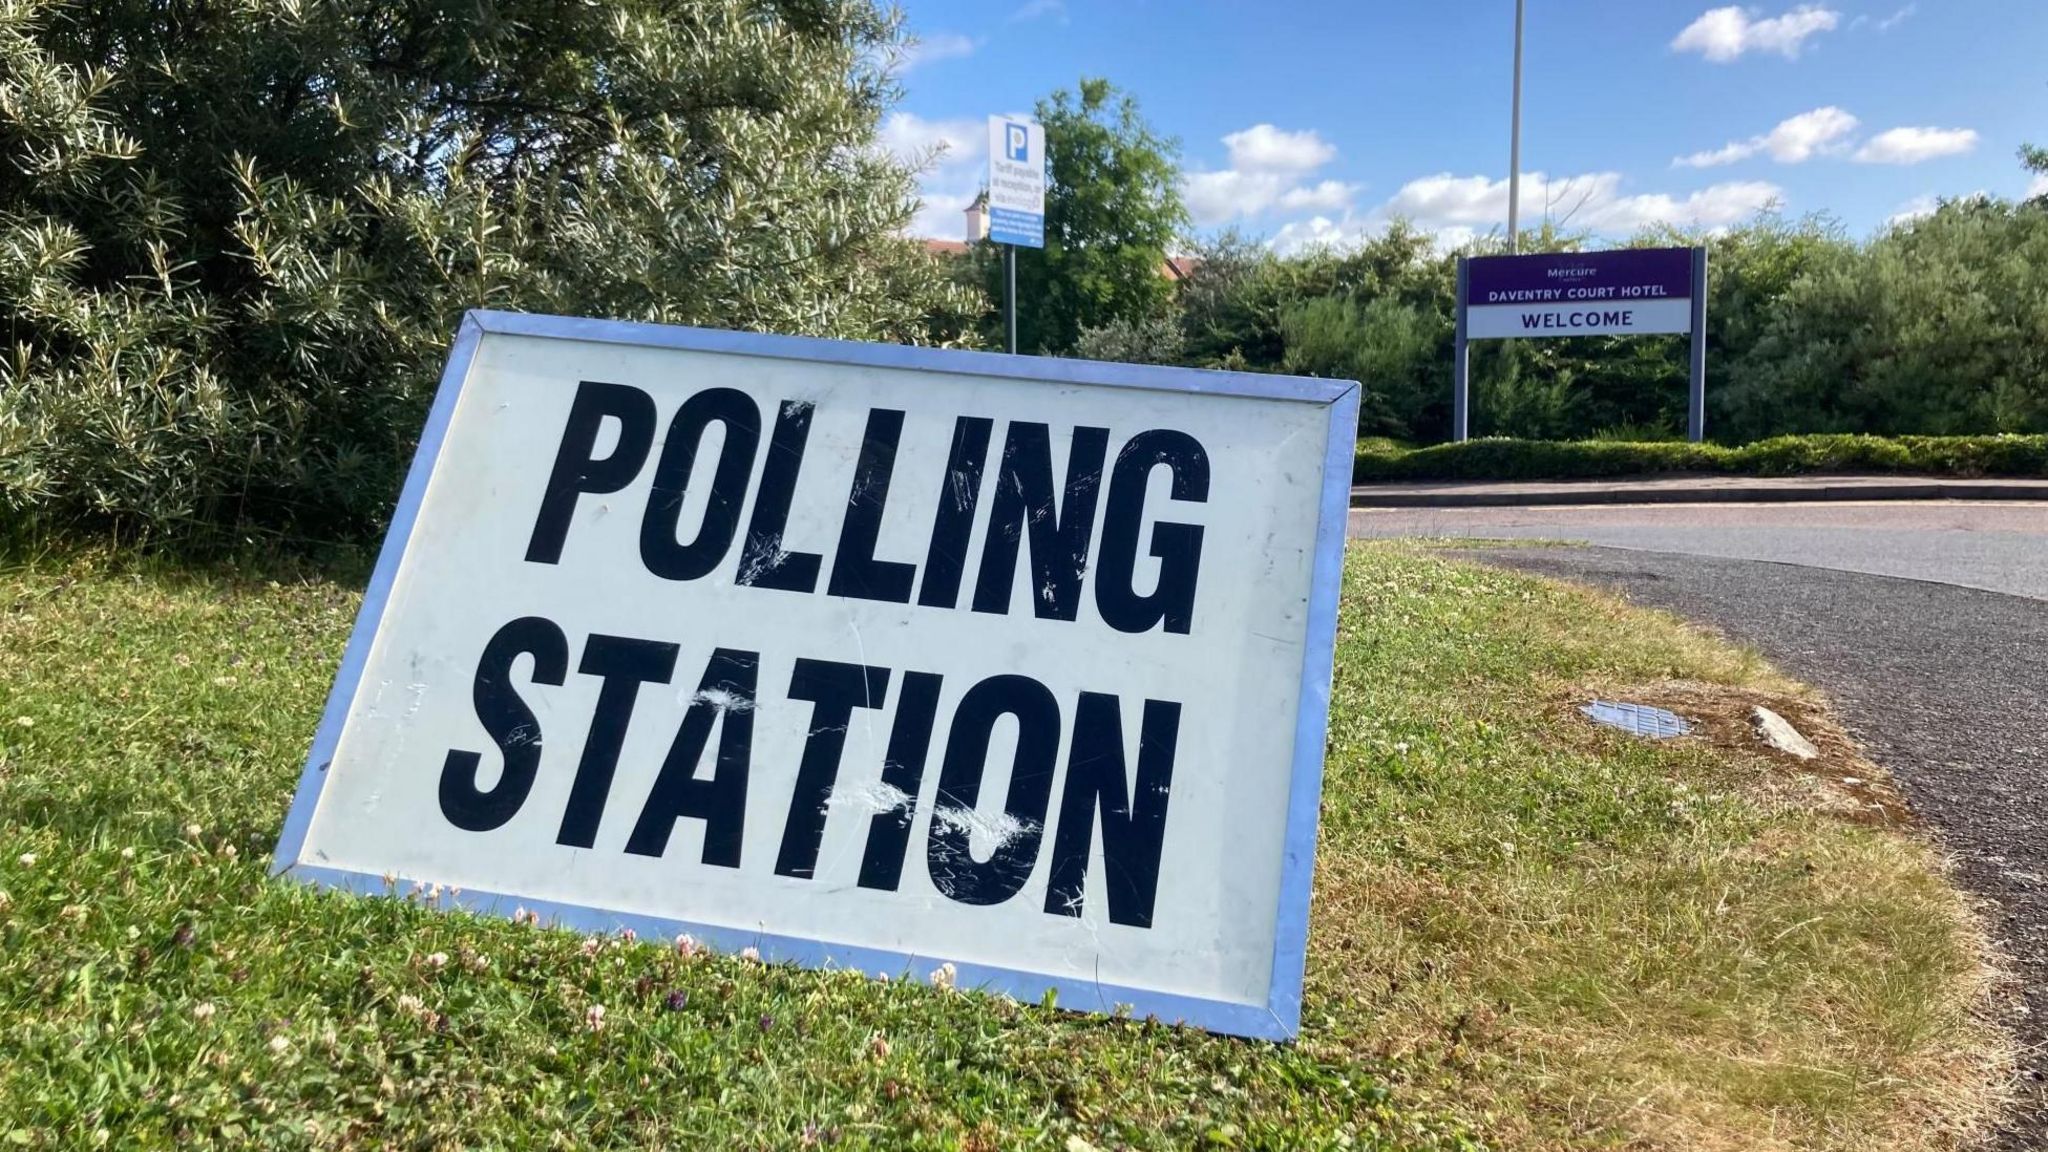 Polling station sign on grass in Daventry